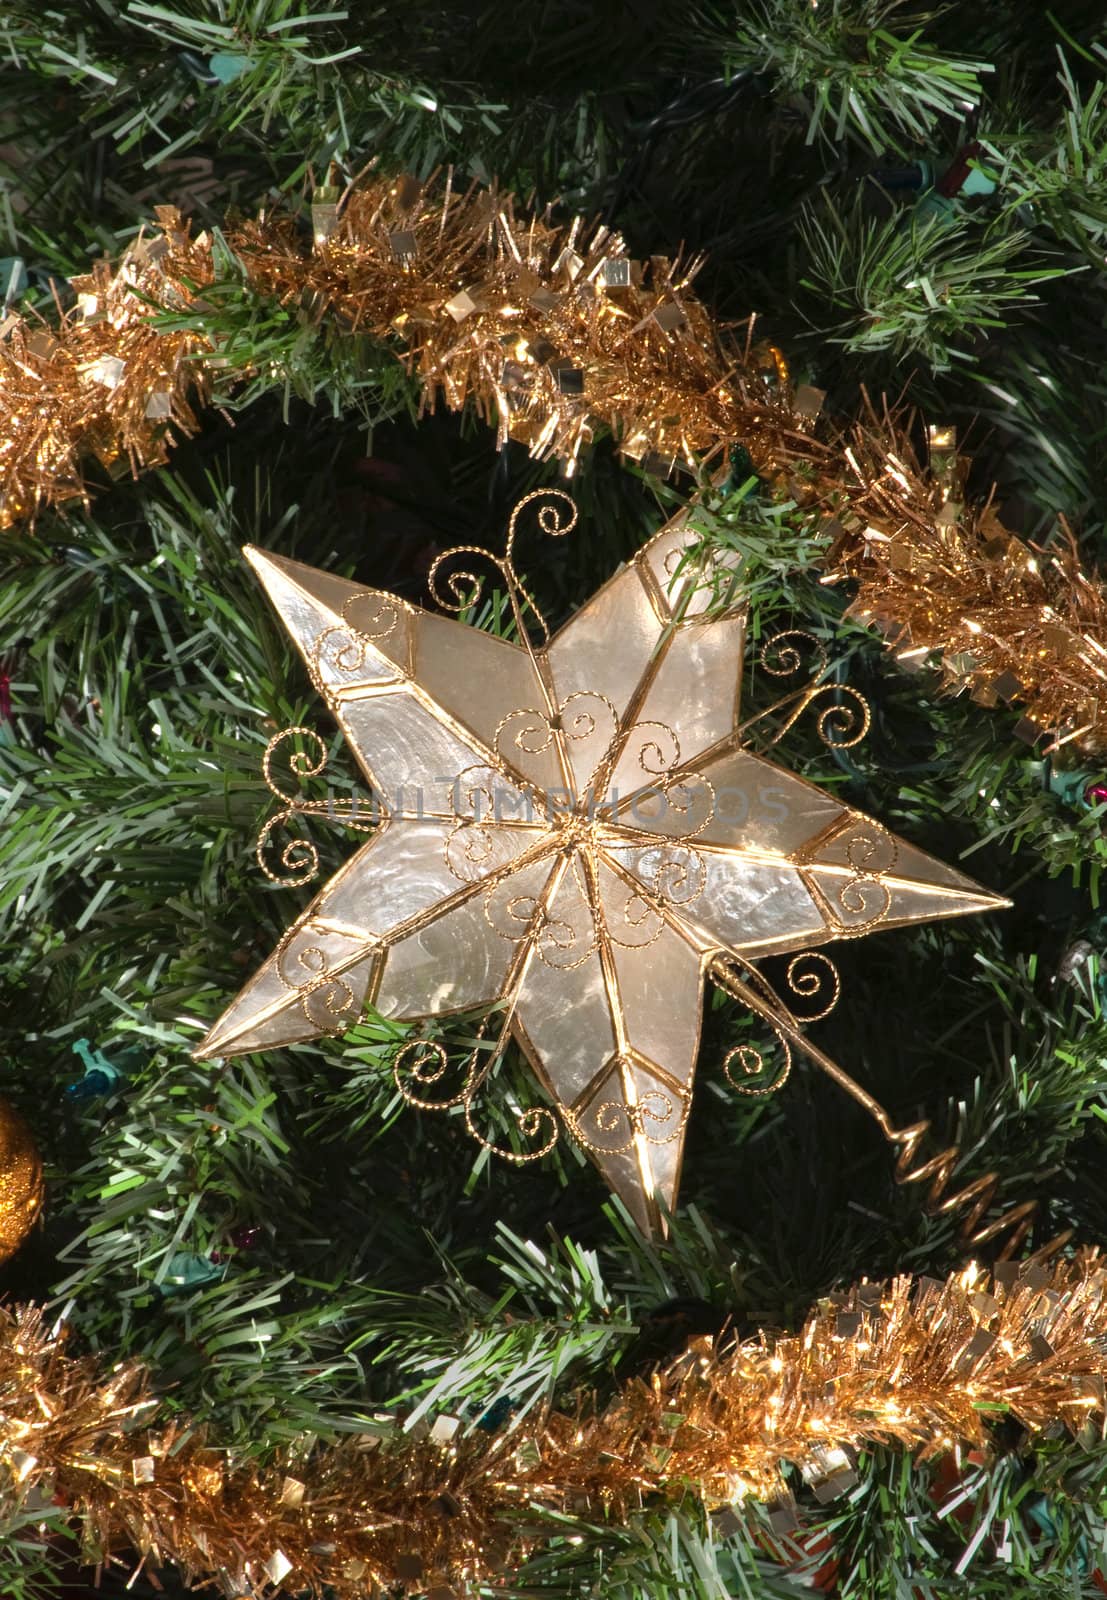 Star surrounded by pine and christmas ornaments